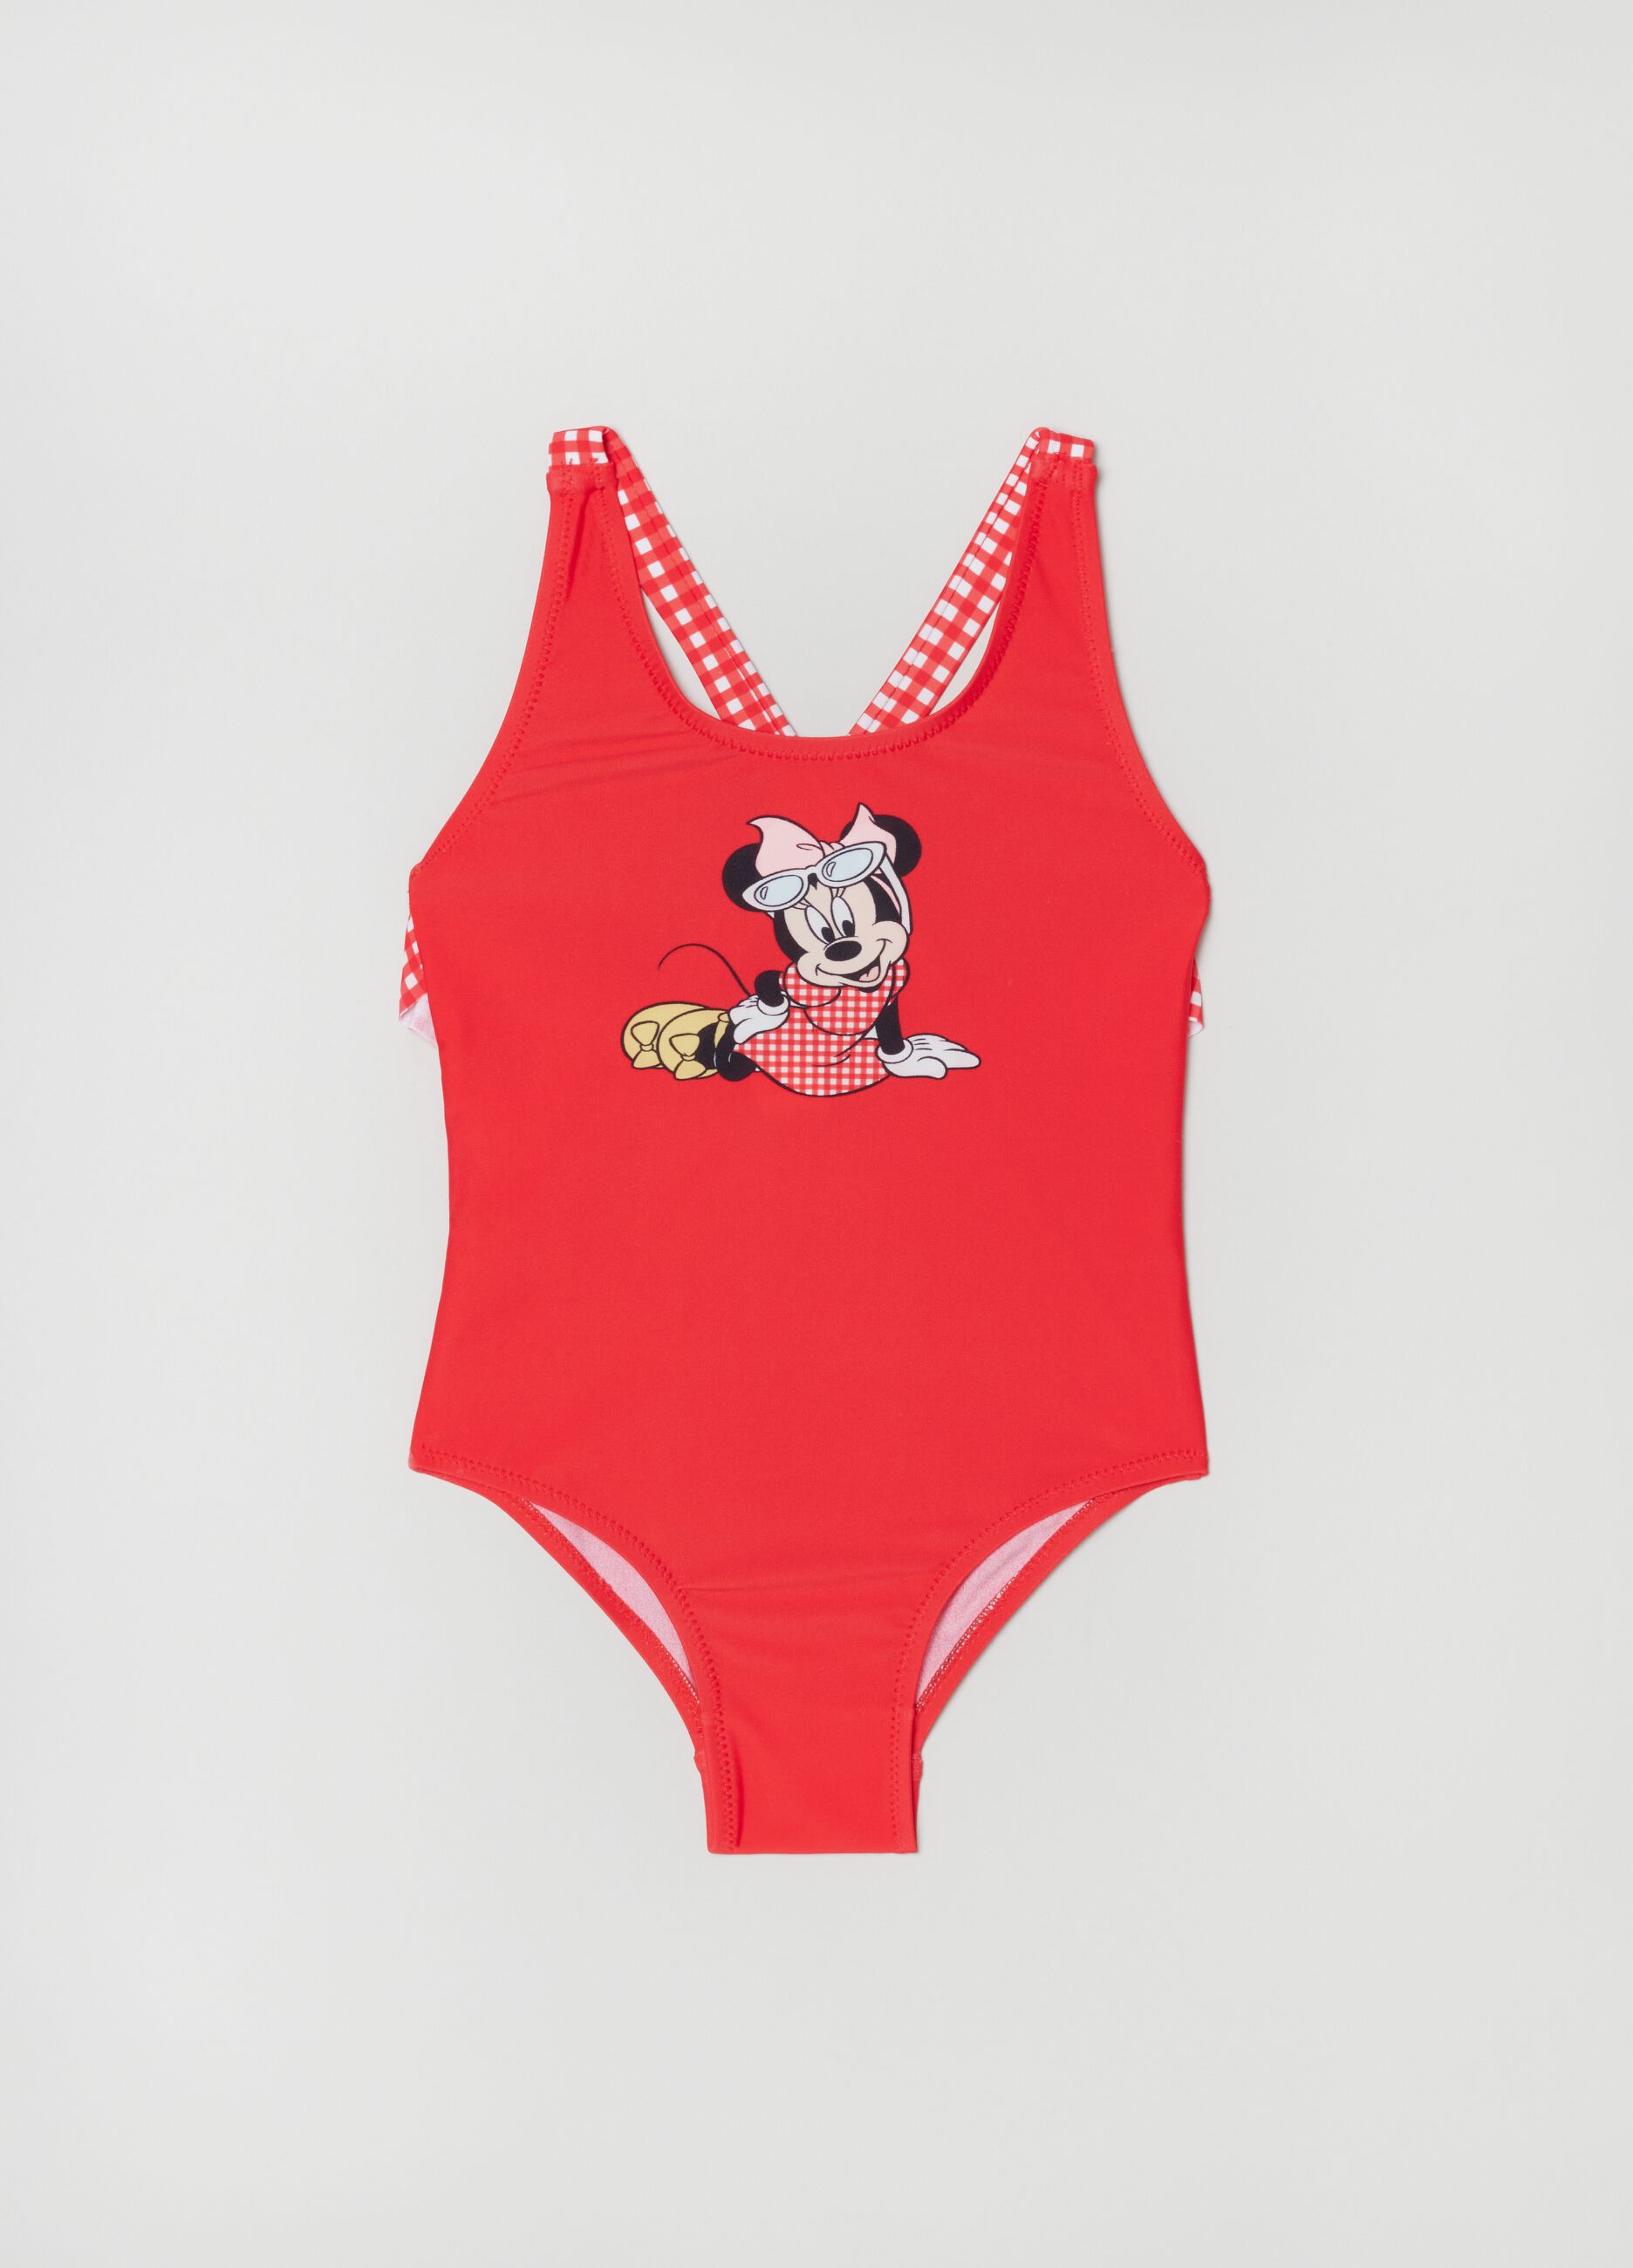 Disney Baby Minnie Mouse one-piece swimsuit